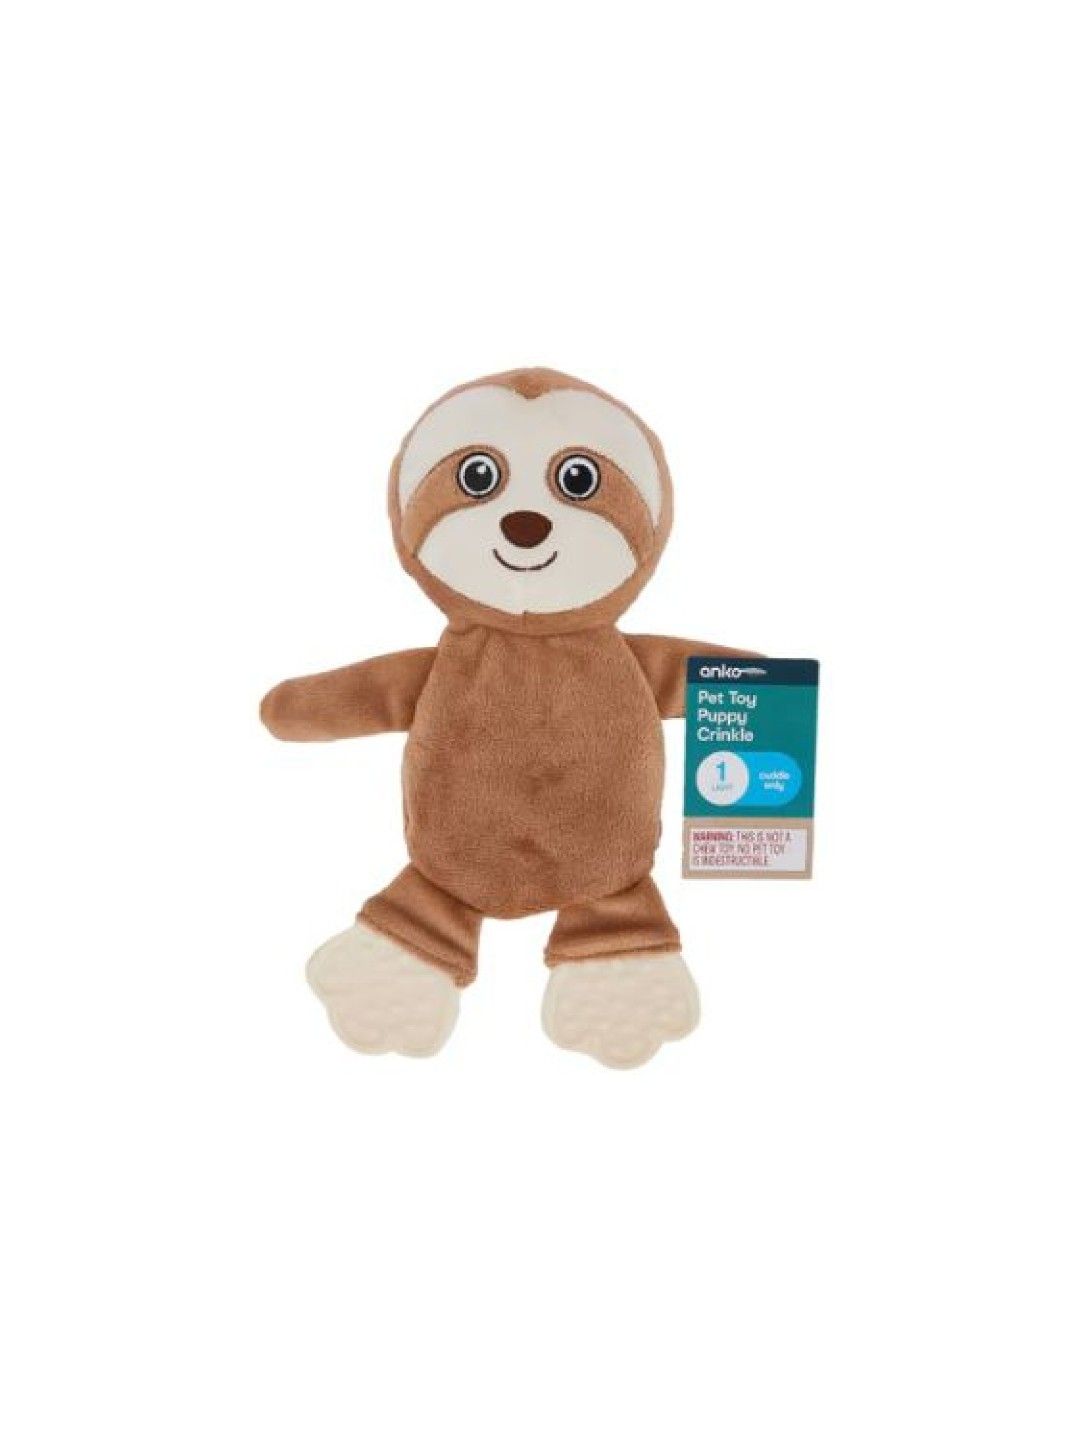 Anko Pet Toy Puppy Crinkle Sloth (Brown- Image 4)